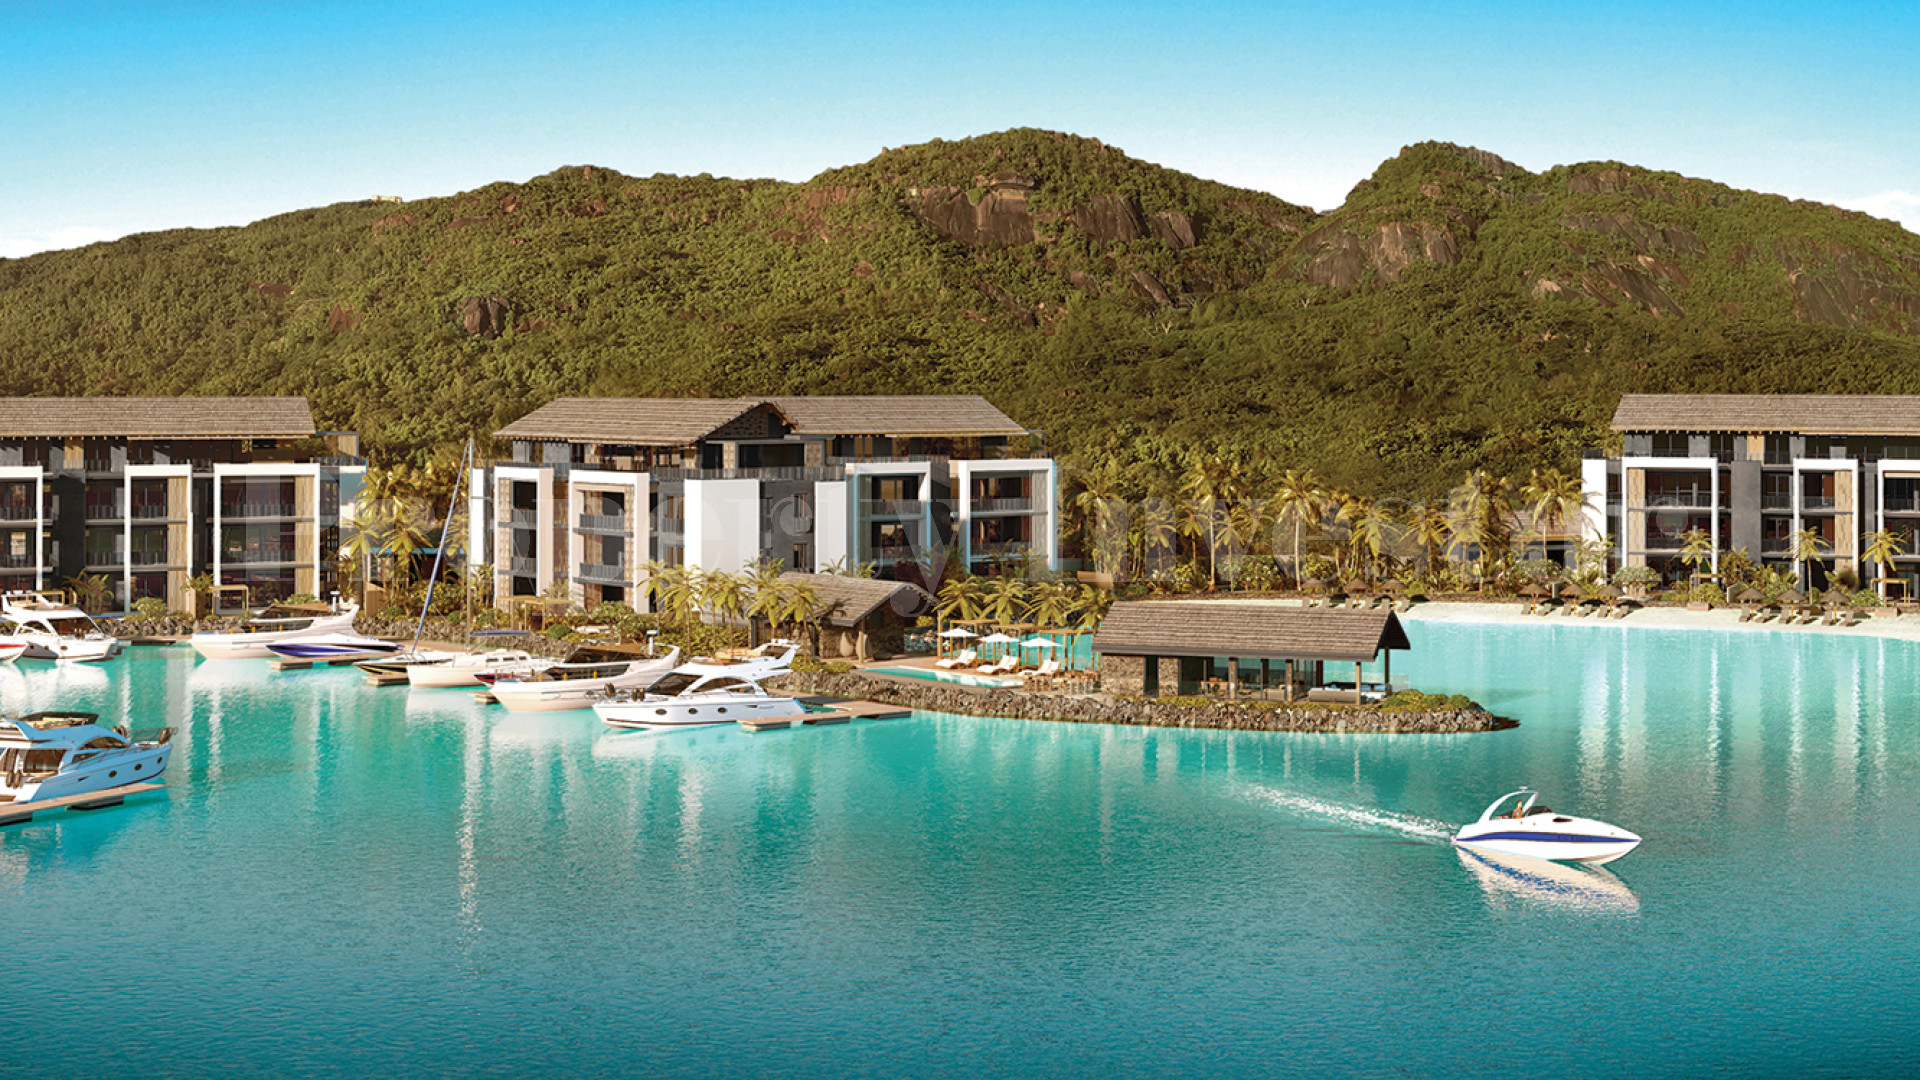 2 Bedroom Luxury Apartment with Award-Winning Design for Sale in Seychelles